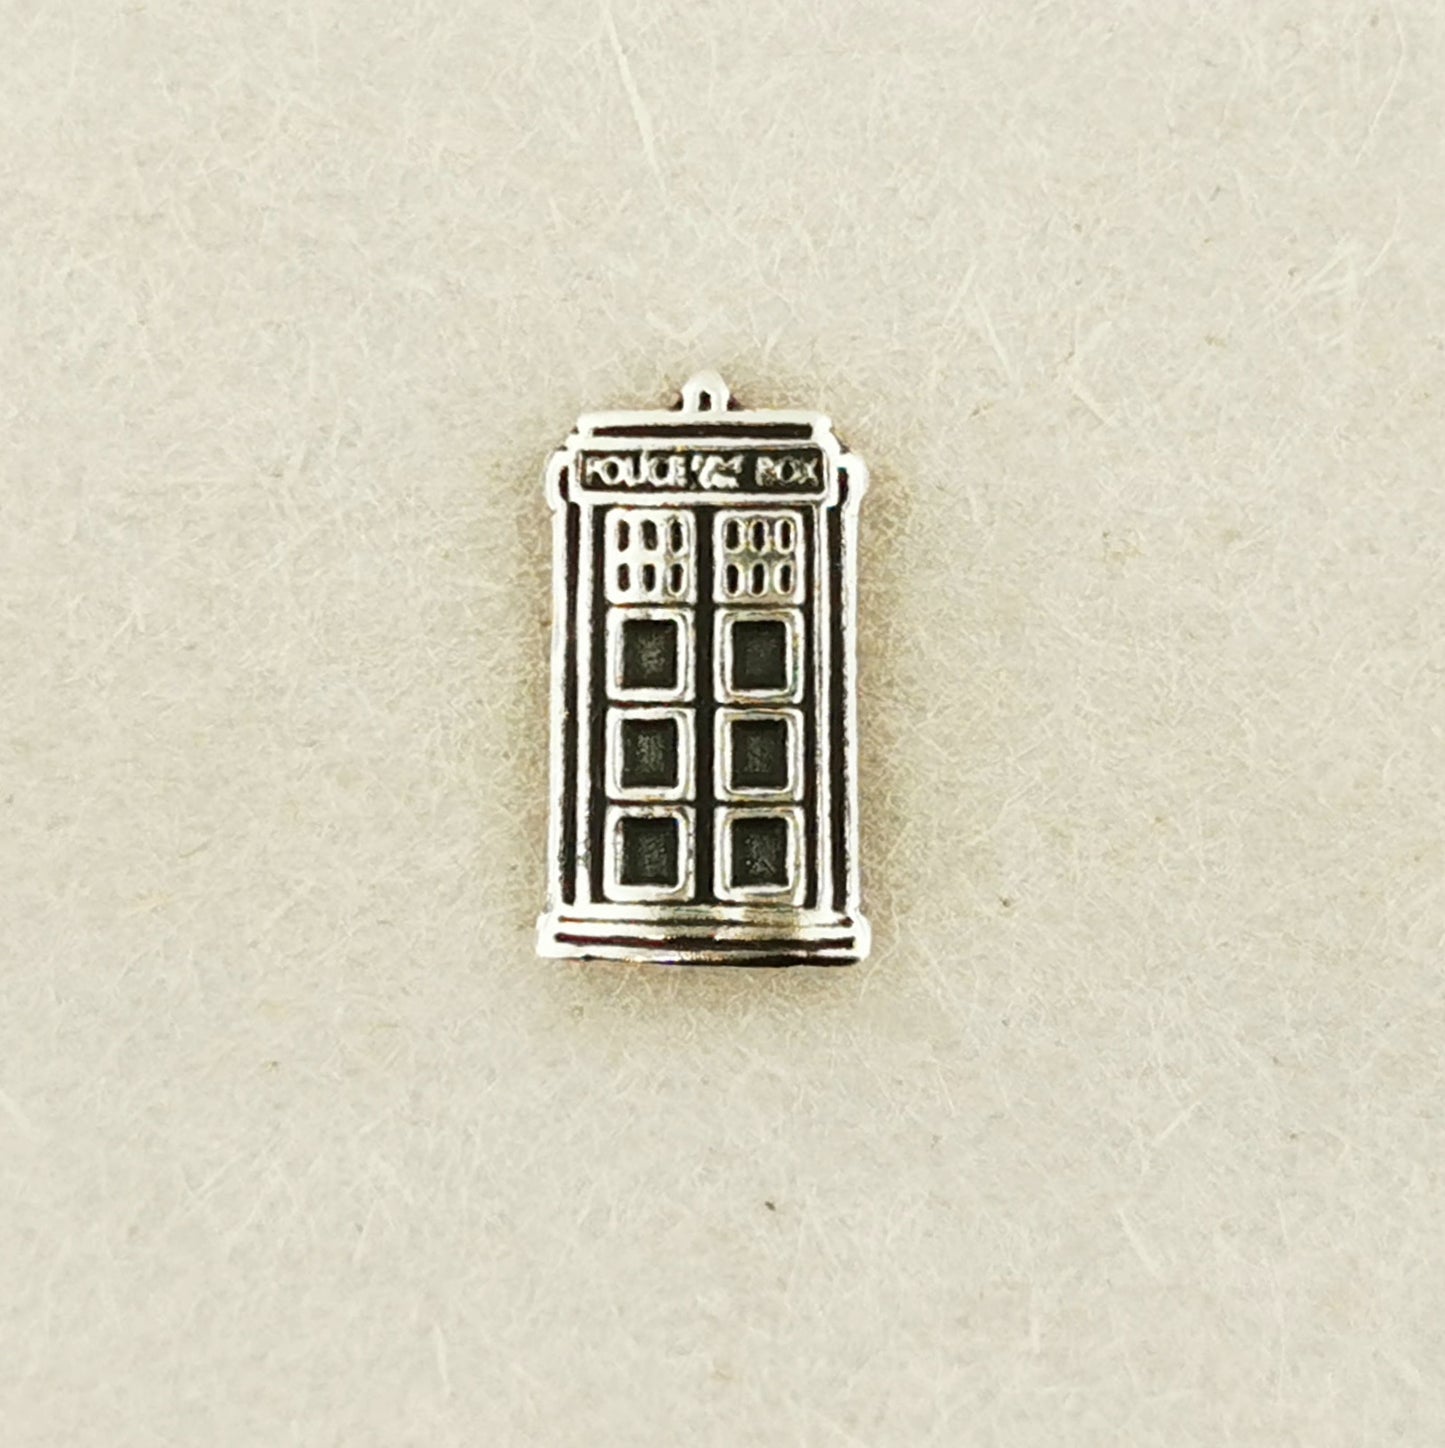 Gold Dr Who Tardis Single Stud Earring, Dr Who Earring, Phone Box Stud Earring, Dr Who Jewellery, Police Box Earring, Dr Who Jewelry, Phone Box Studs, Dr Who Phone Box, Gold Phone Box Stud, Gold Tardis Earrings, Sci-Fi Jewelry, Gold Stud Earrings